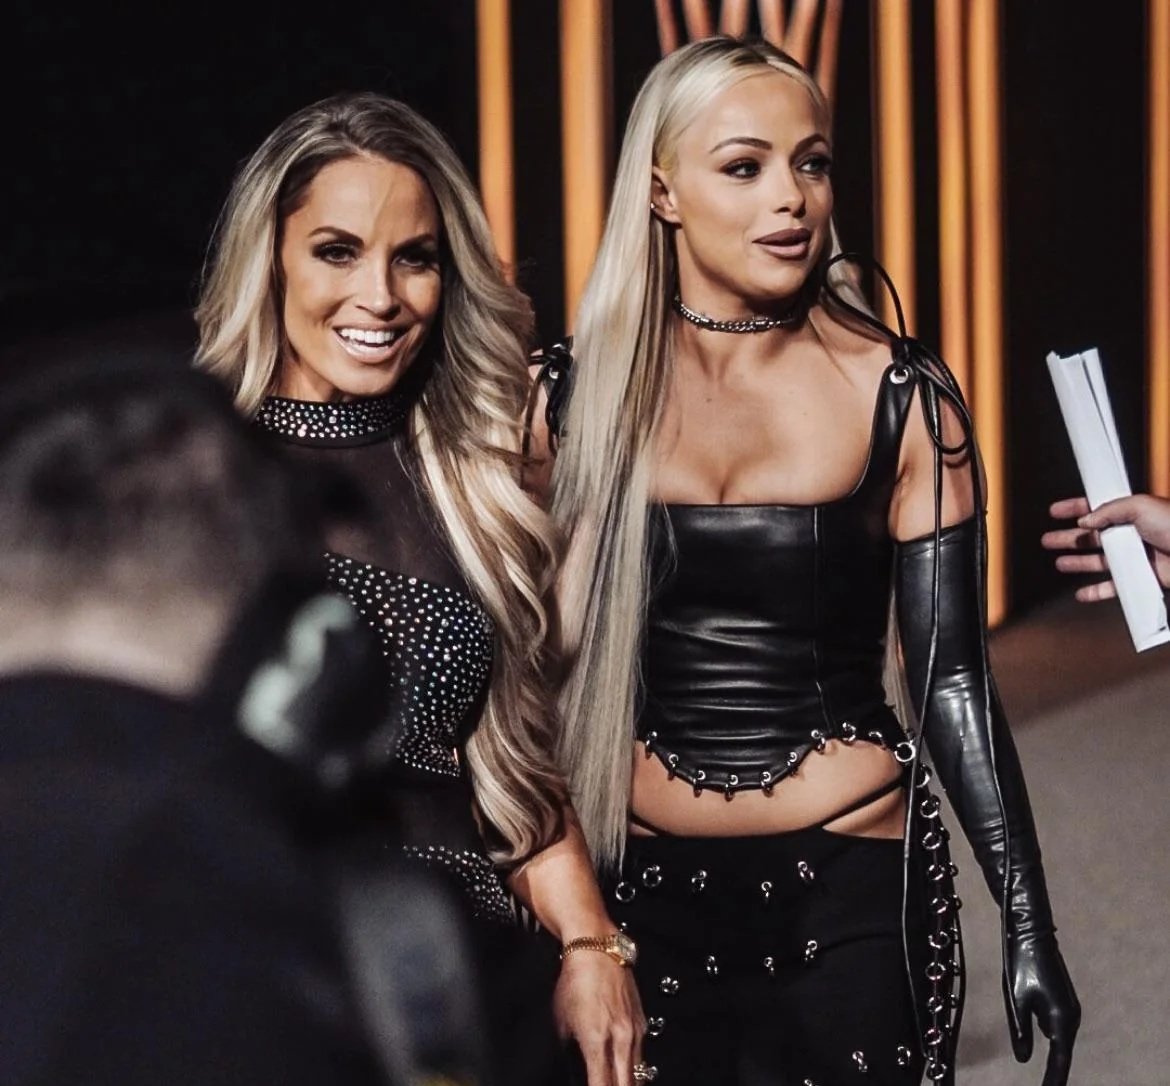 The Then and Now of women's wrestling in WWE! Trish Stratus & Liv Morgan in one frame! I bet Trish Stratus is on the LMRT @YaOnlyLivvOnce @trishstratuscom 

#SmackDown #WWERaw #WWEHOF #WWENXT #Wrestling